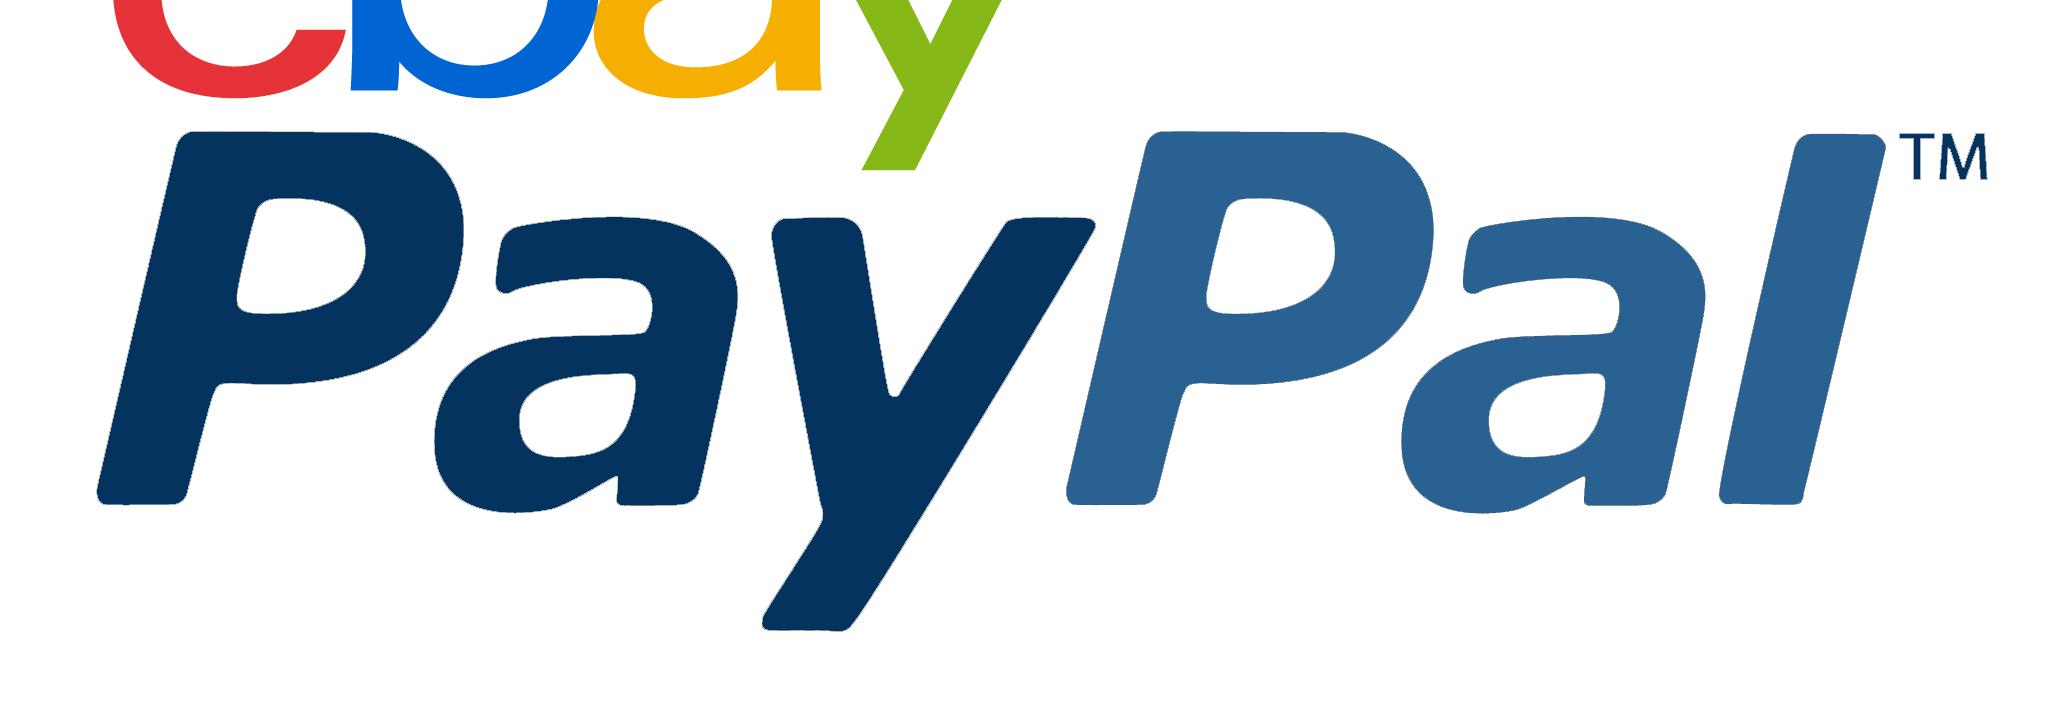 eBay PayPal Logo - eBay To Spin Off PayPal So They Can Compete Against Each Other For ...